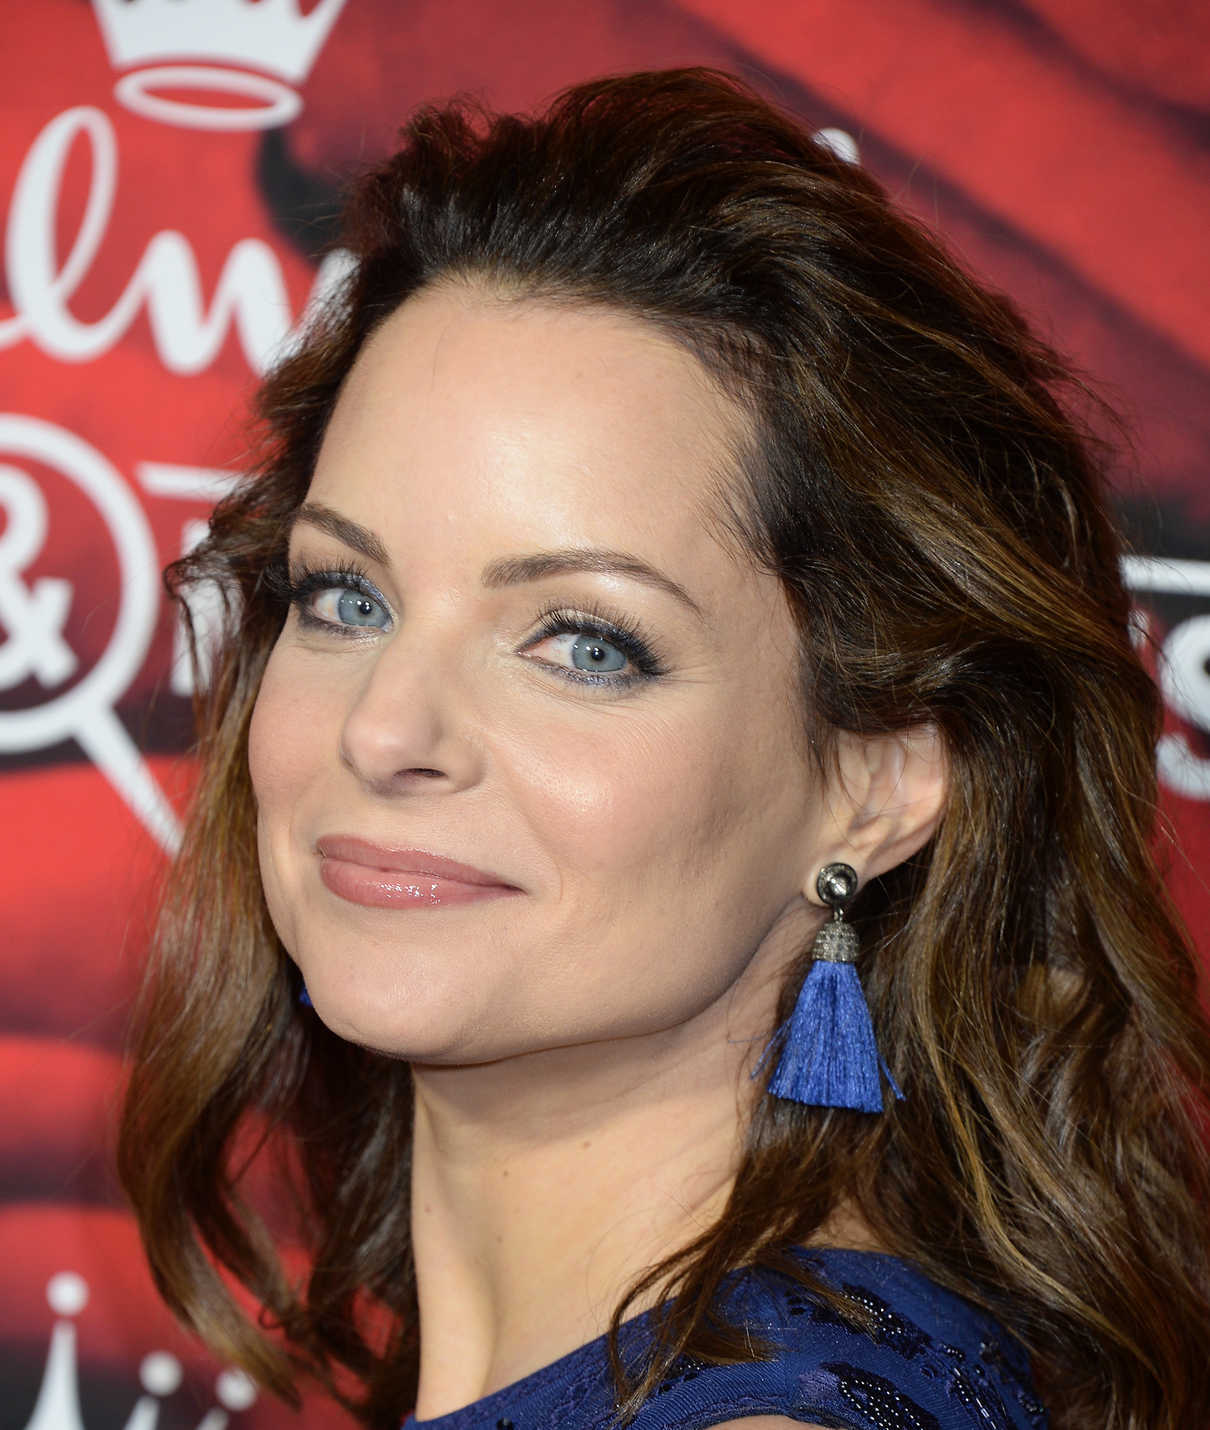 Kimberly Williams-Paisley at the Hallmark Channel TCA Winter Press Tour in Pasadena 01/14/2017-4